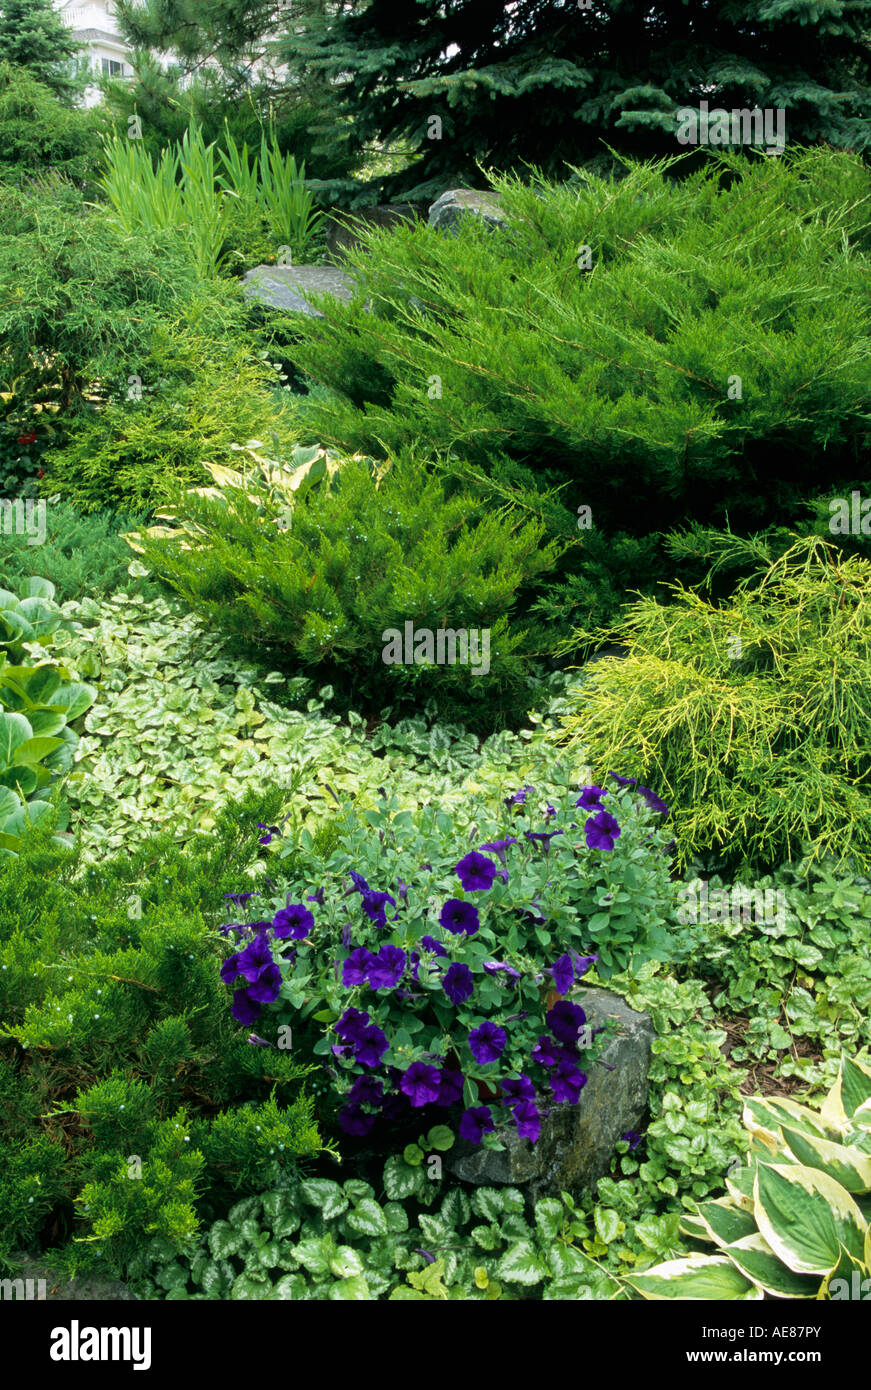 CORNER OF MINNESOTA GARDEN WITH PERENNIALS AND CYPRESS. LATE SUMMER. Stock Photo